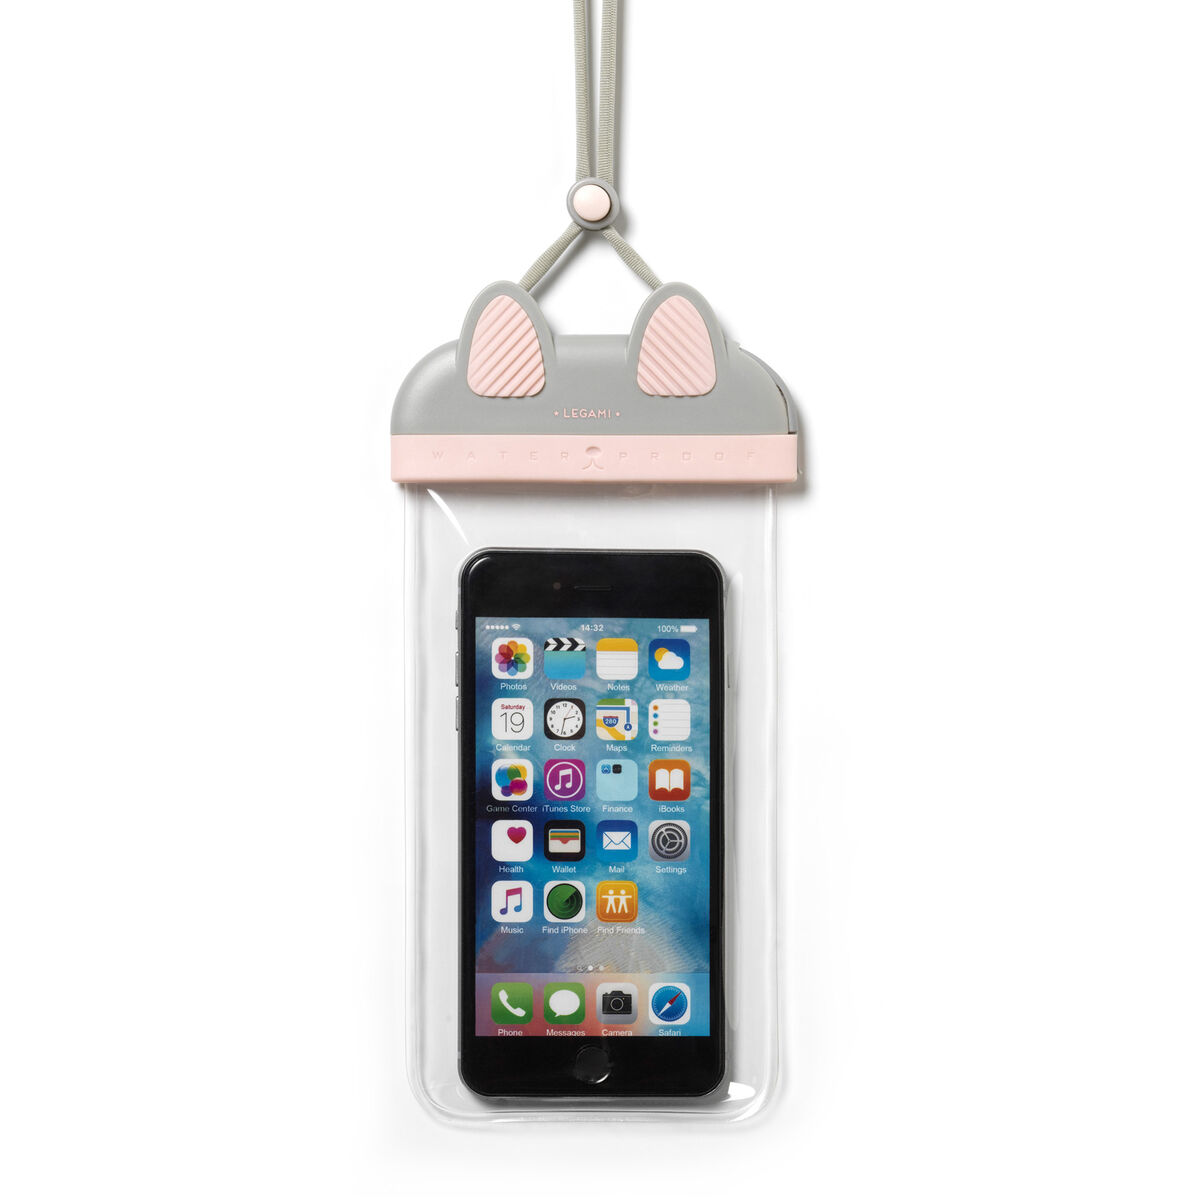 Funda Impermeable para Smartphone - Waterproof Smartphone Pouch, , zoo